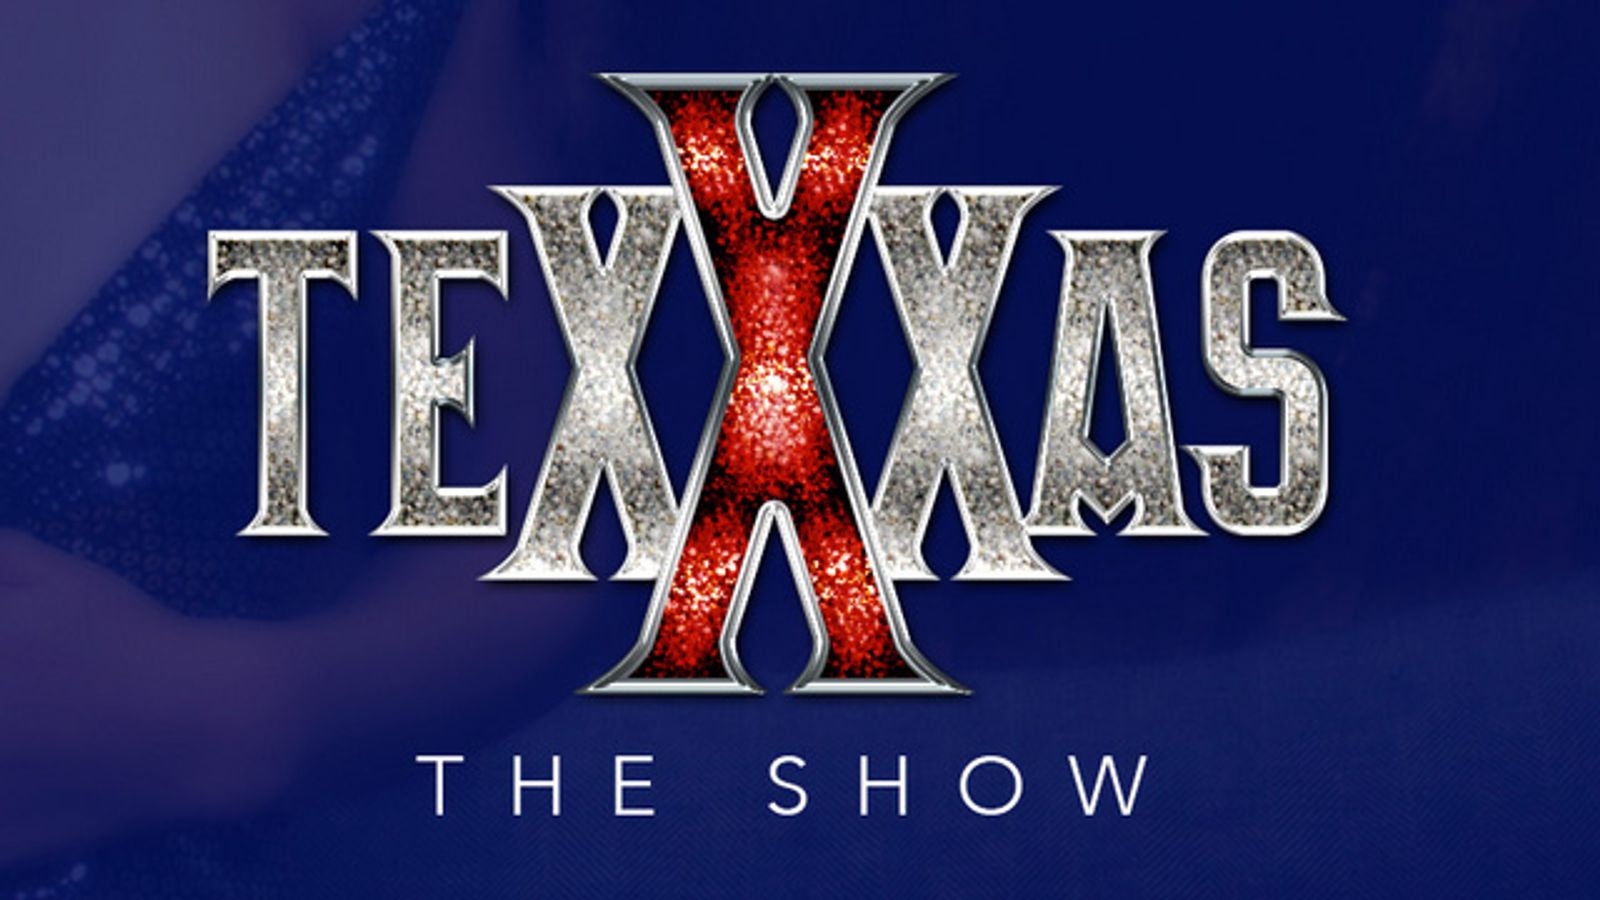 TEXXXAS Expo to Change Venues Again as Holiday Inn Backs Out